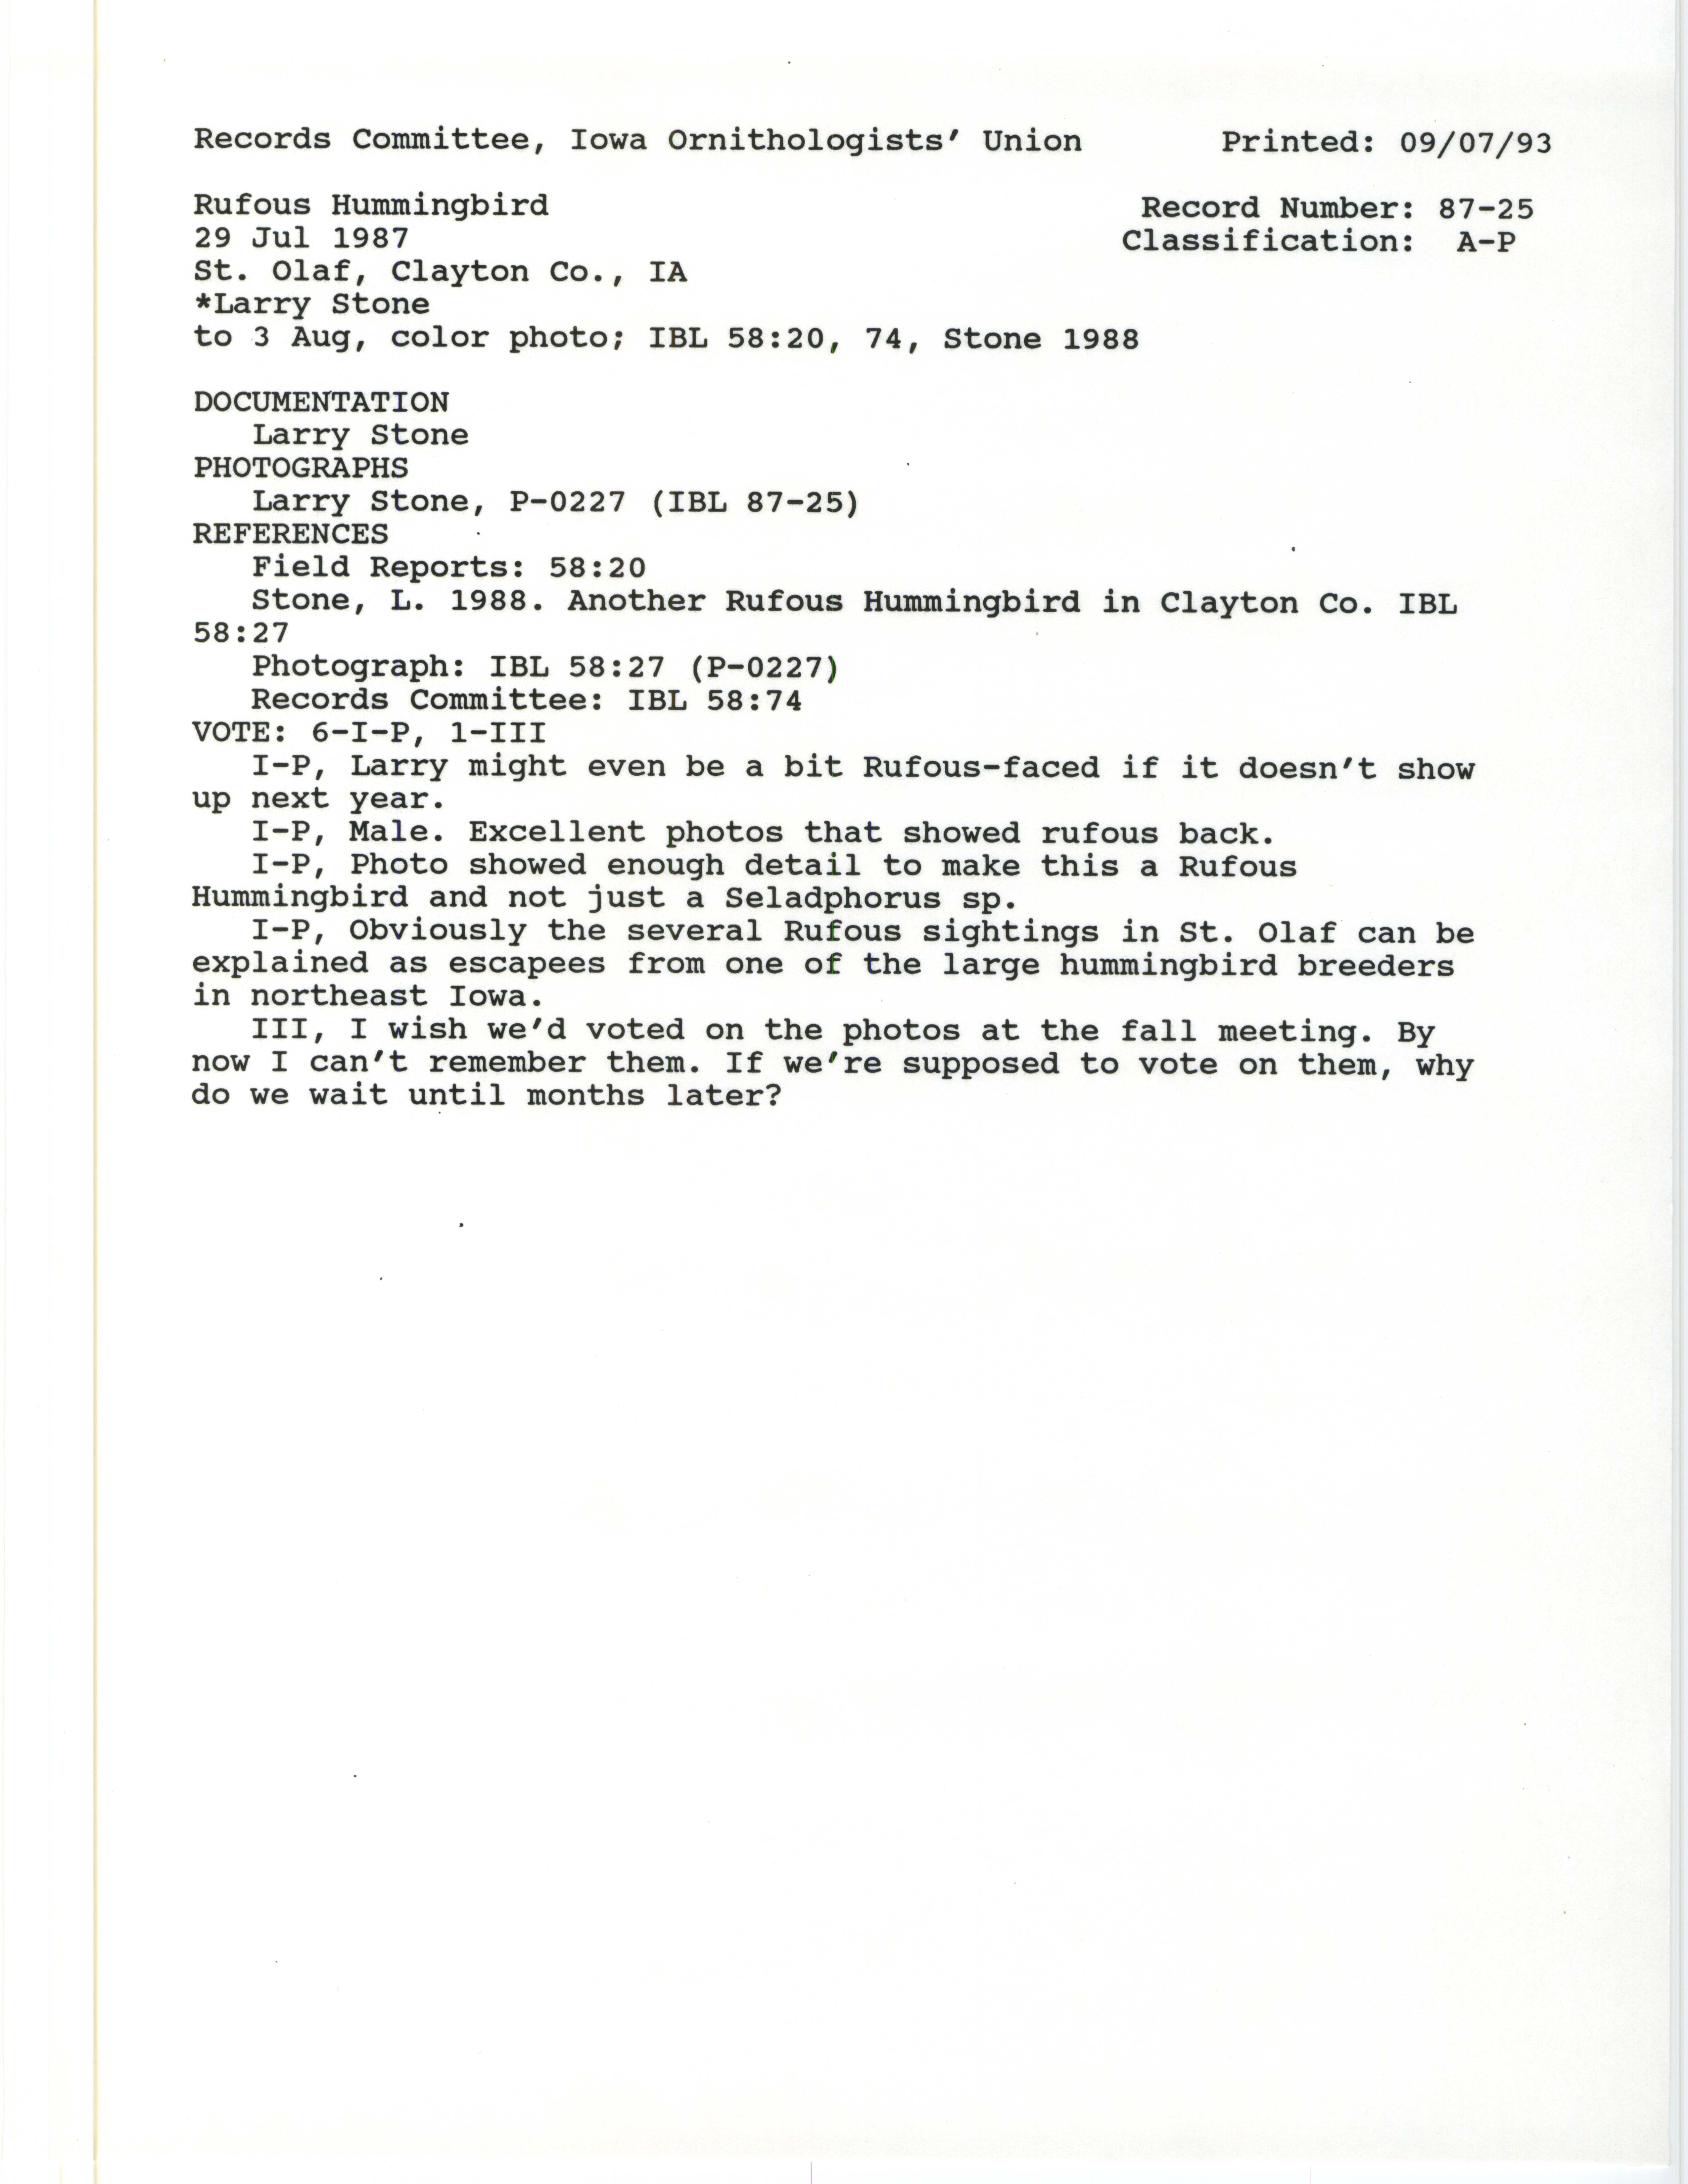 Records Committee review for rare bird sighting for Rufous Hummingbird at St. Olaf, 1987